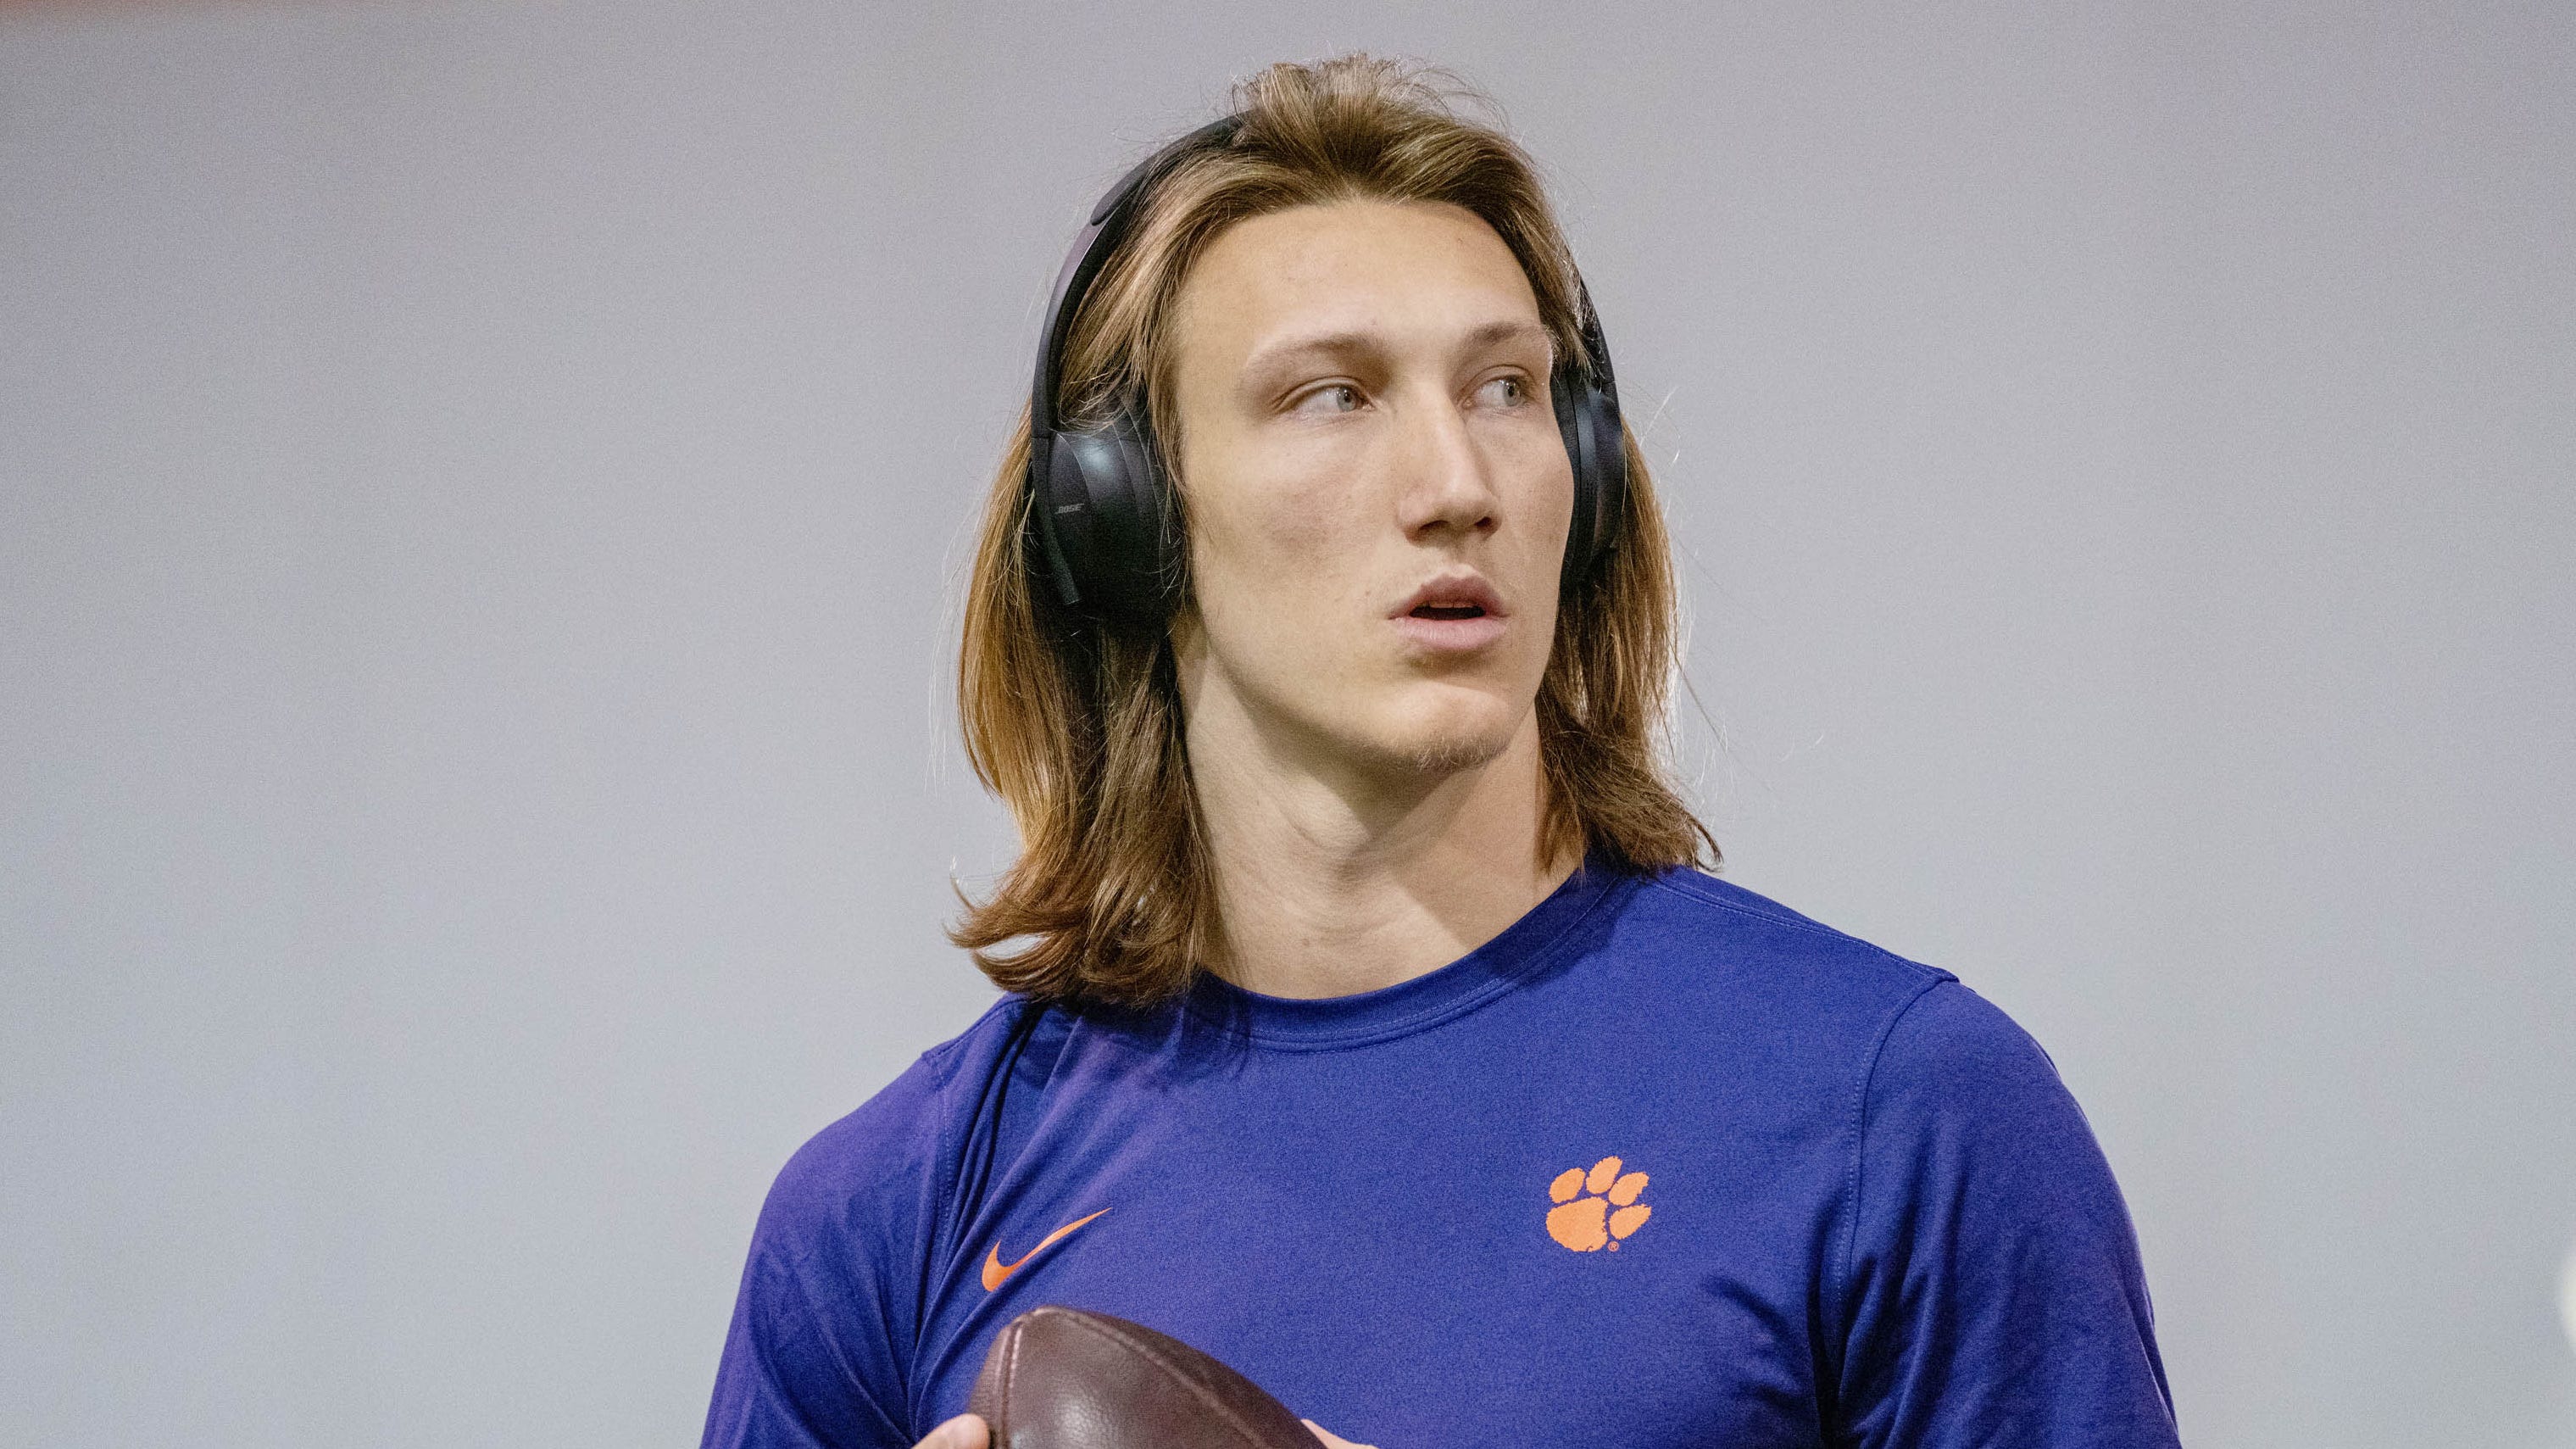 trevor-lawrence-won-t-attend-nfl-draft-will-watch-in-clemson